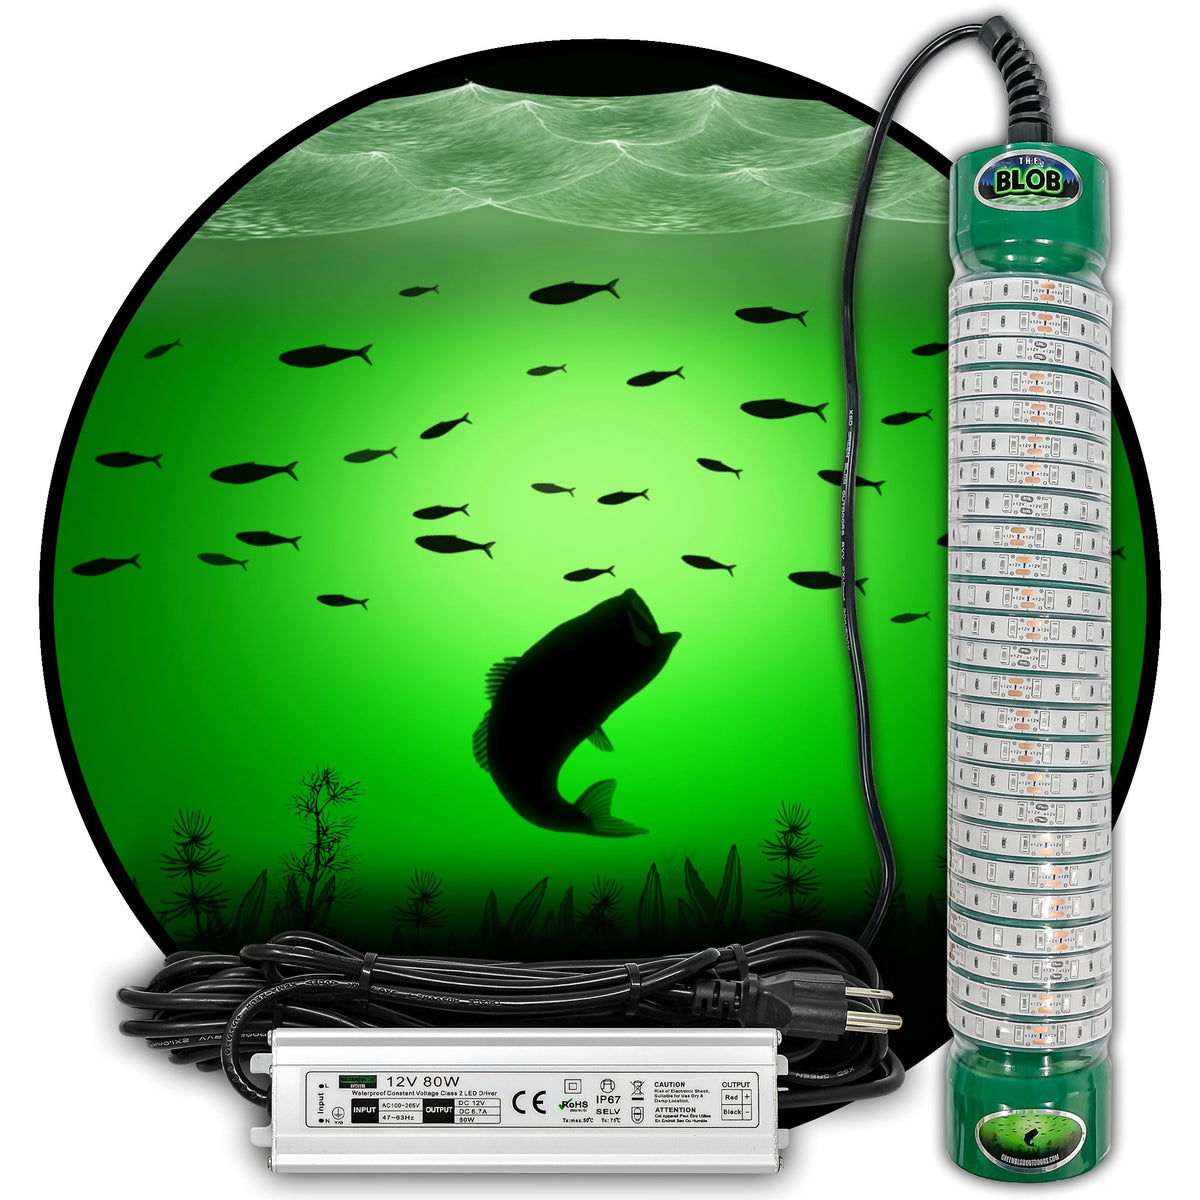 Green Blob Outdoors New Underwater LED Fishing Light 15000 Lumens 12V Battery Powered with Alligator Clips Fish Light Attracting Snook Crappie for